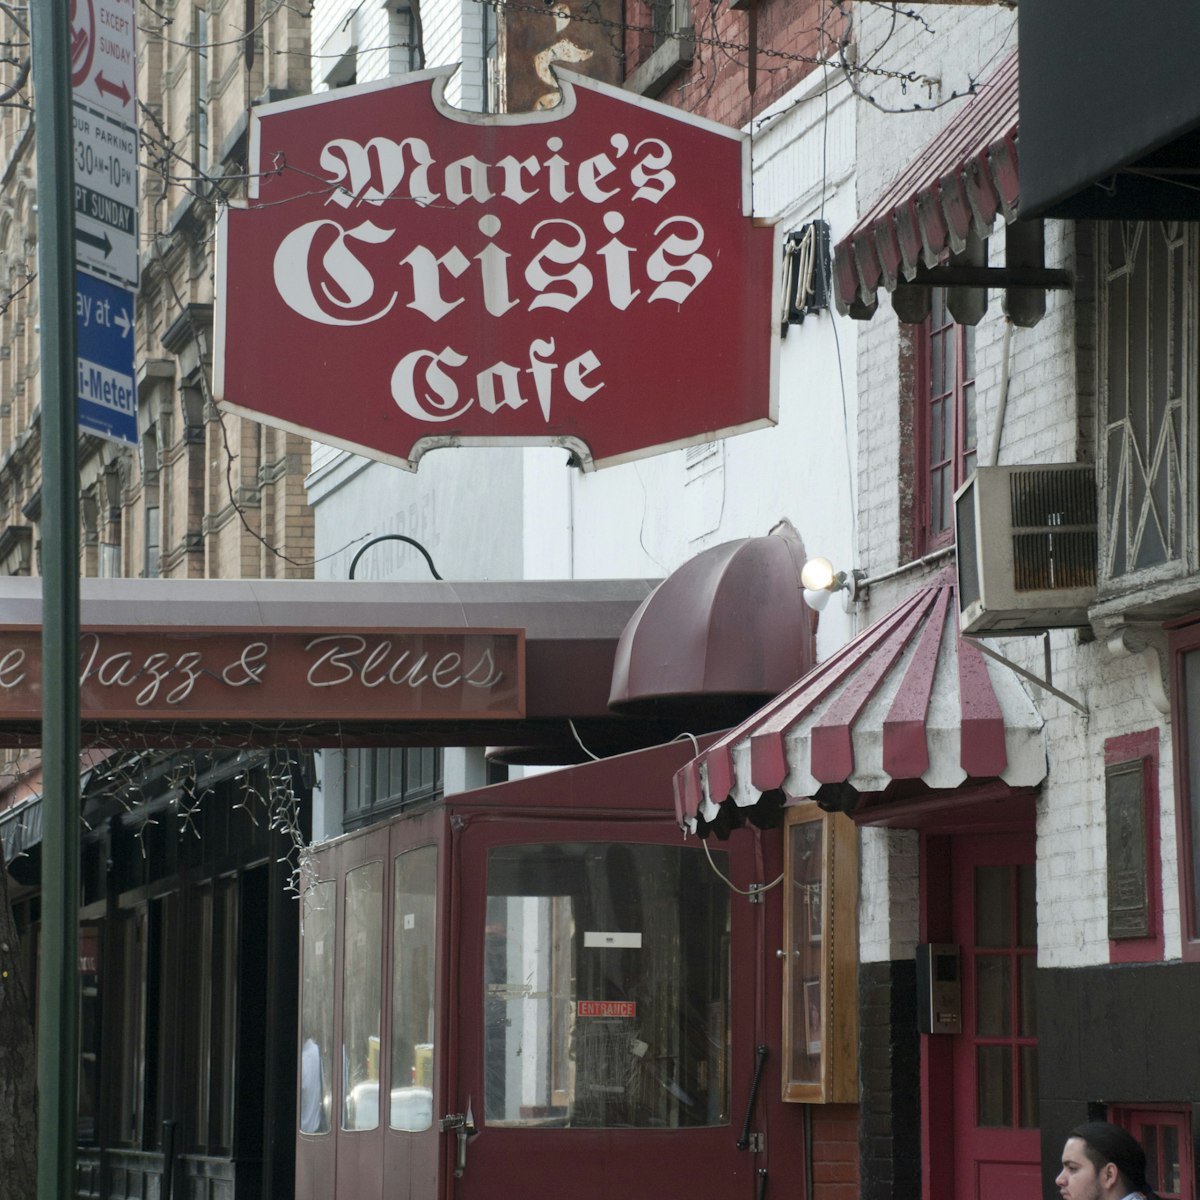 Maries' Crisis cafe in Greenwich Village.